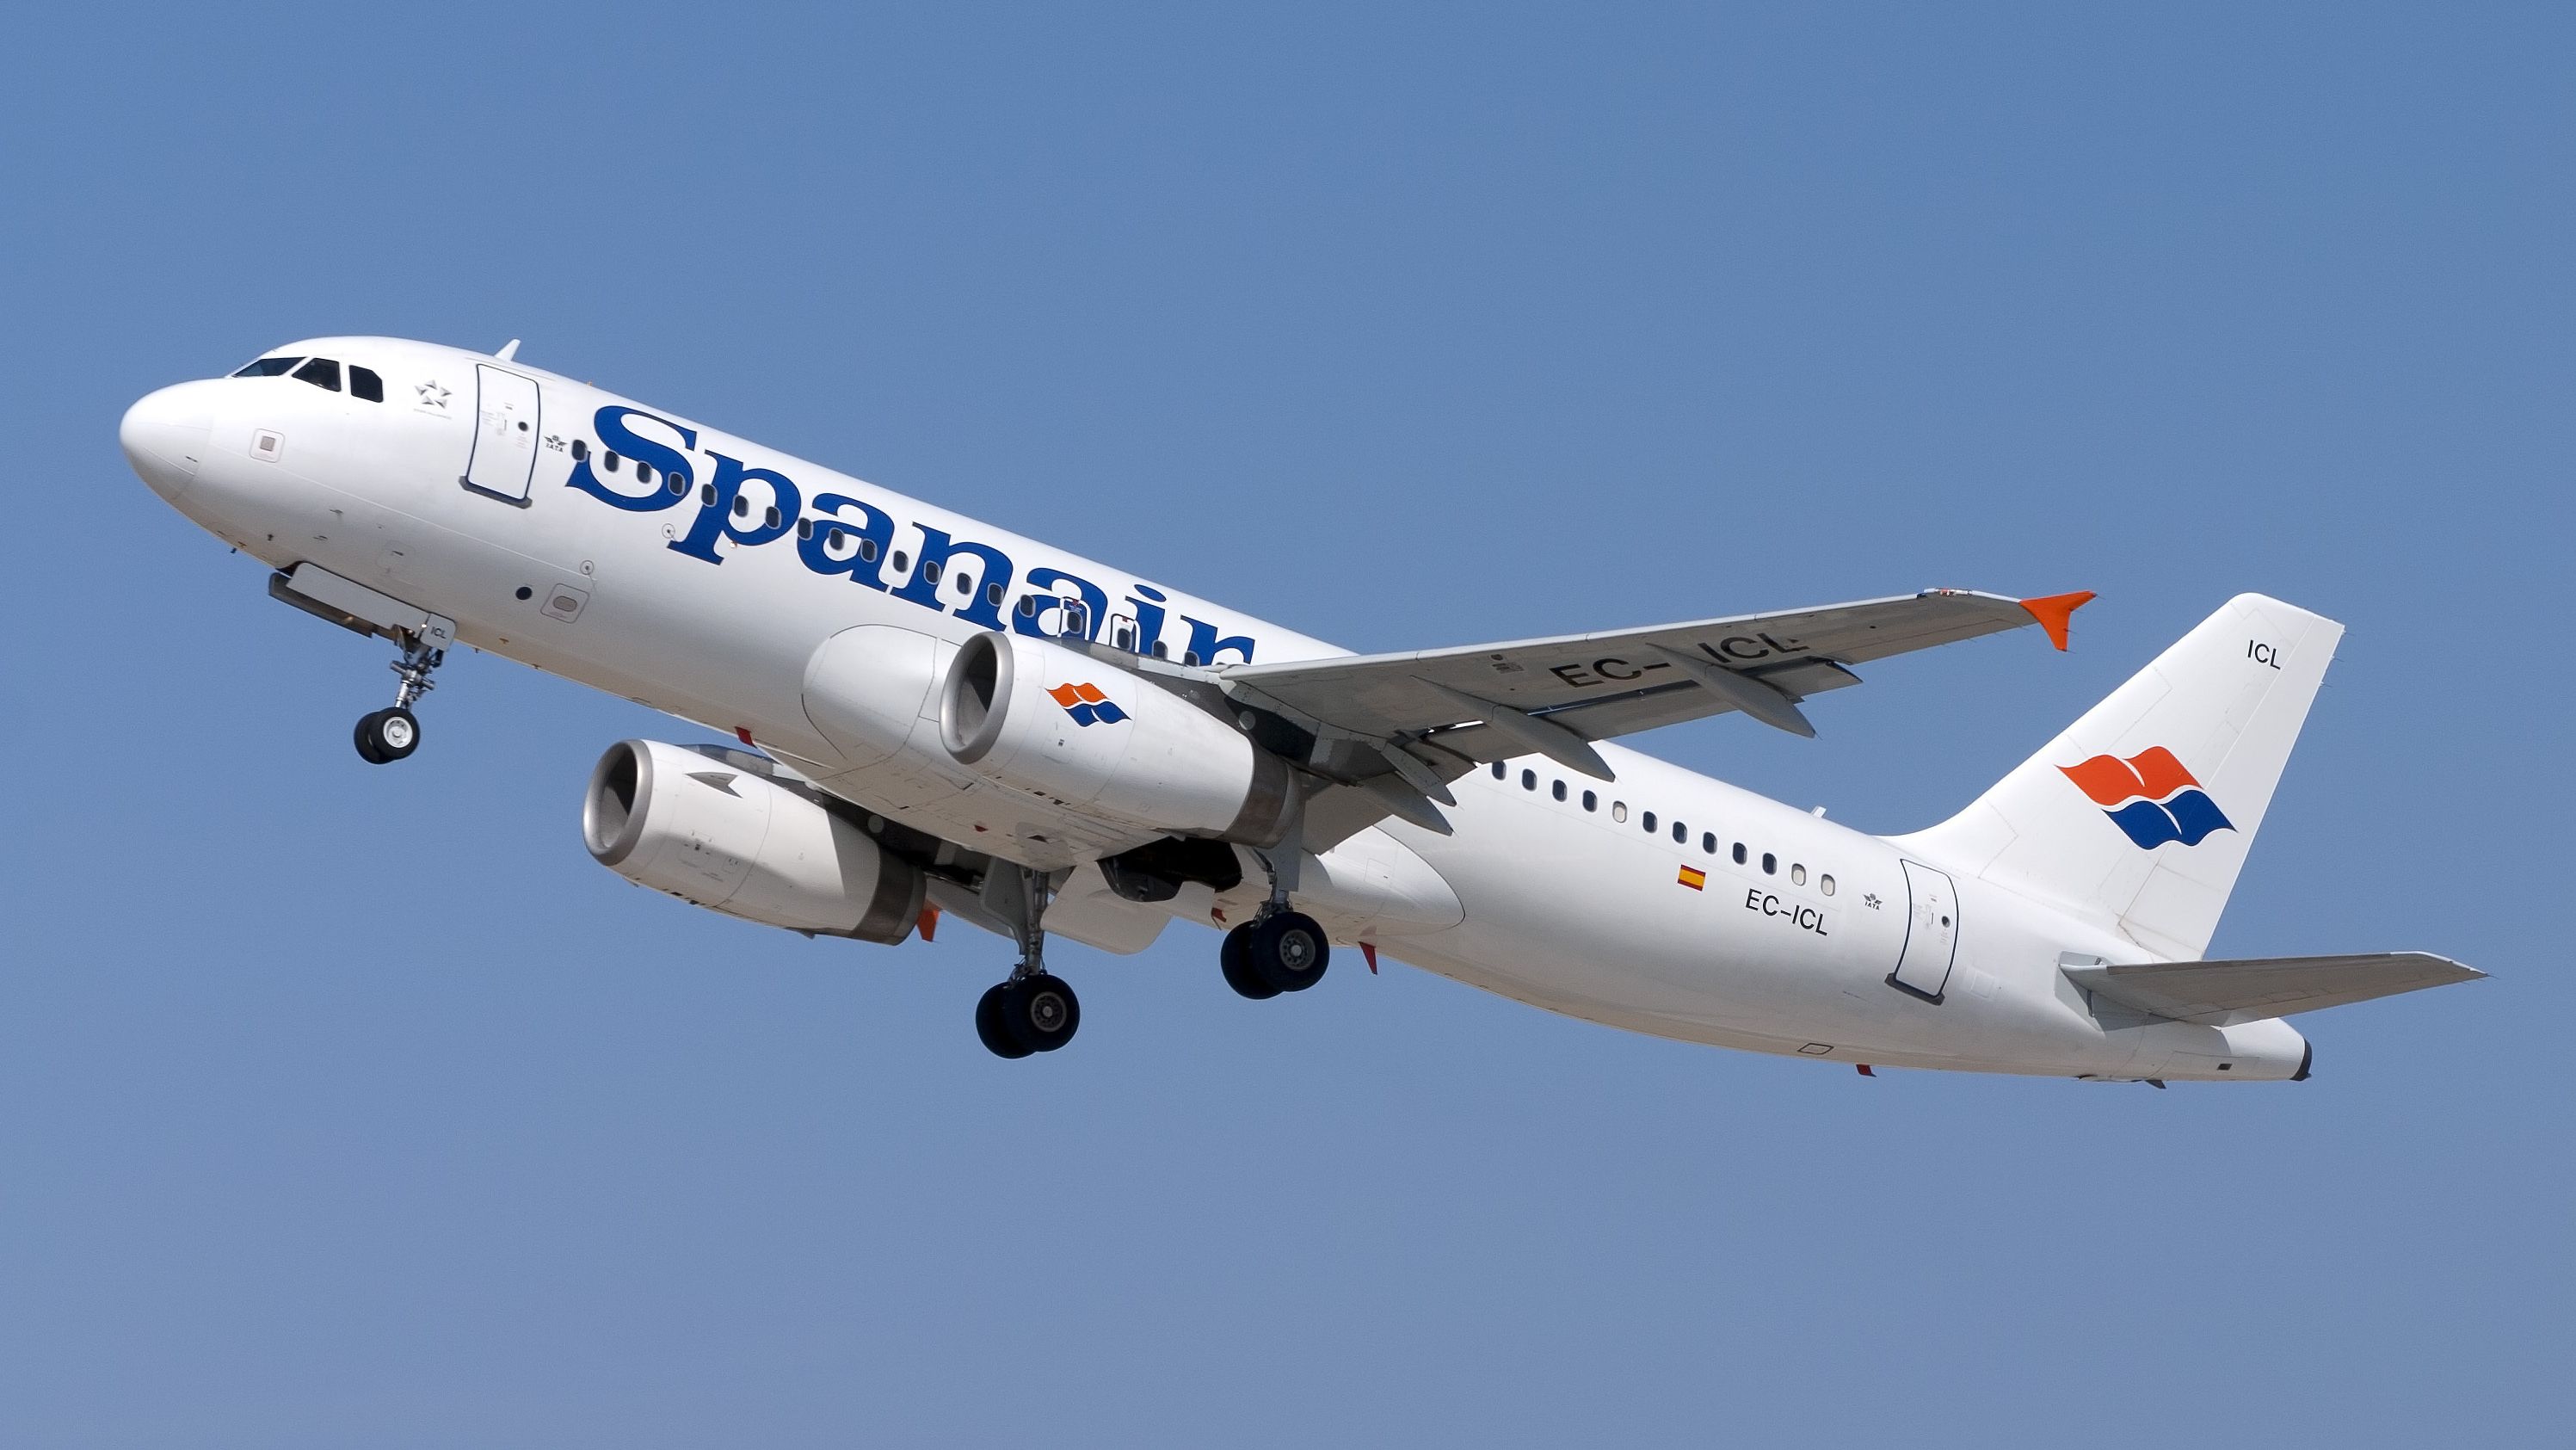 A Spanair aircraft flying in the sky.